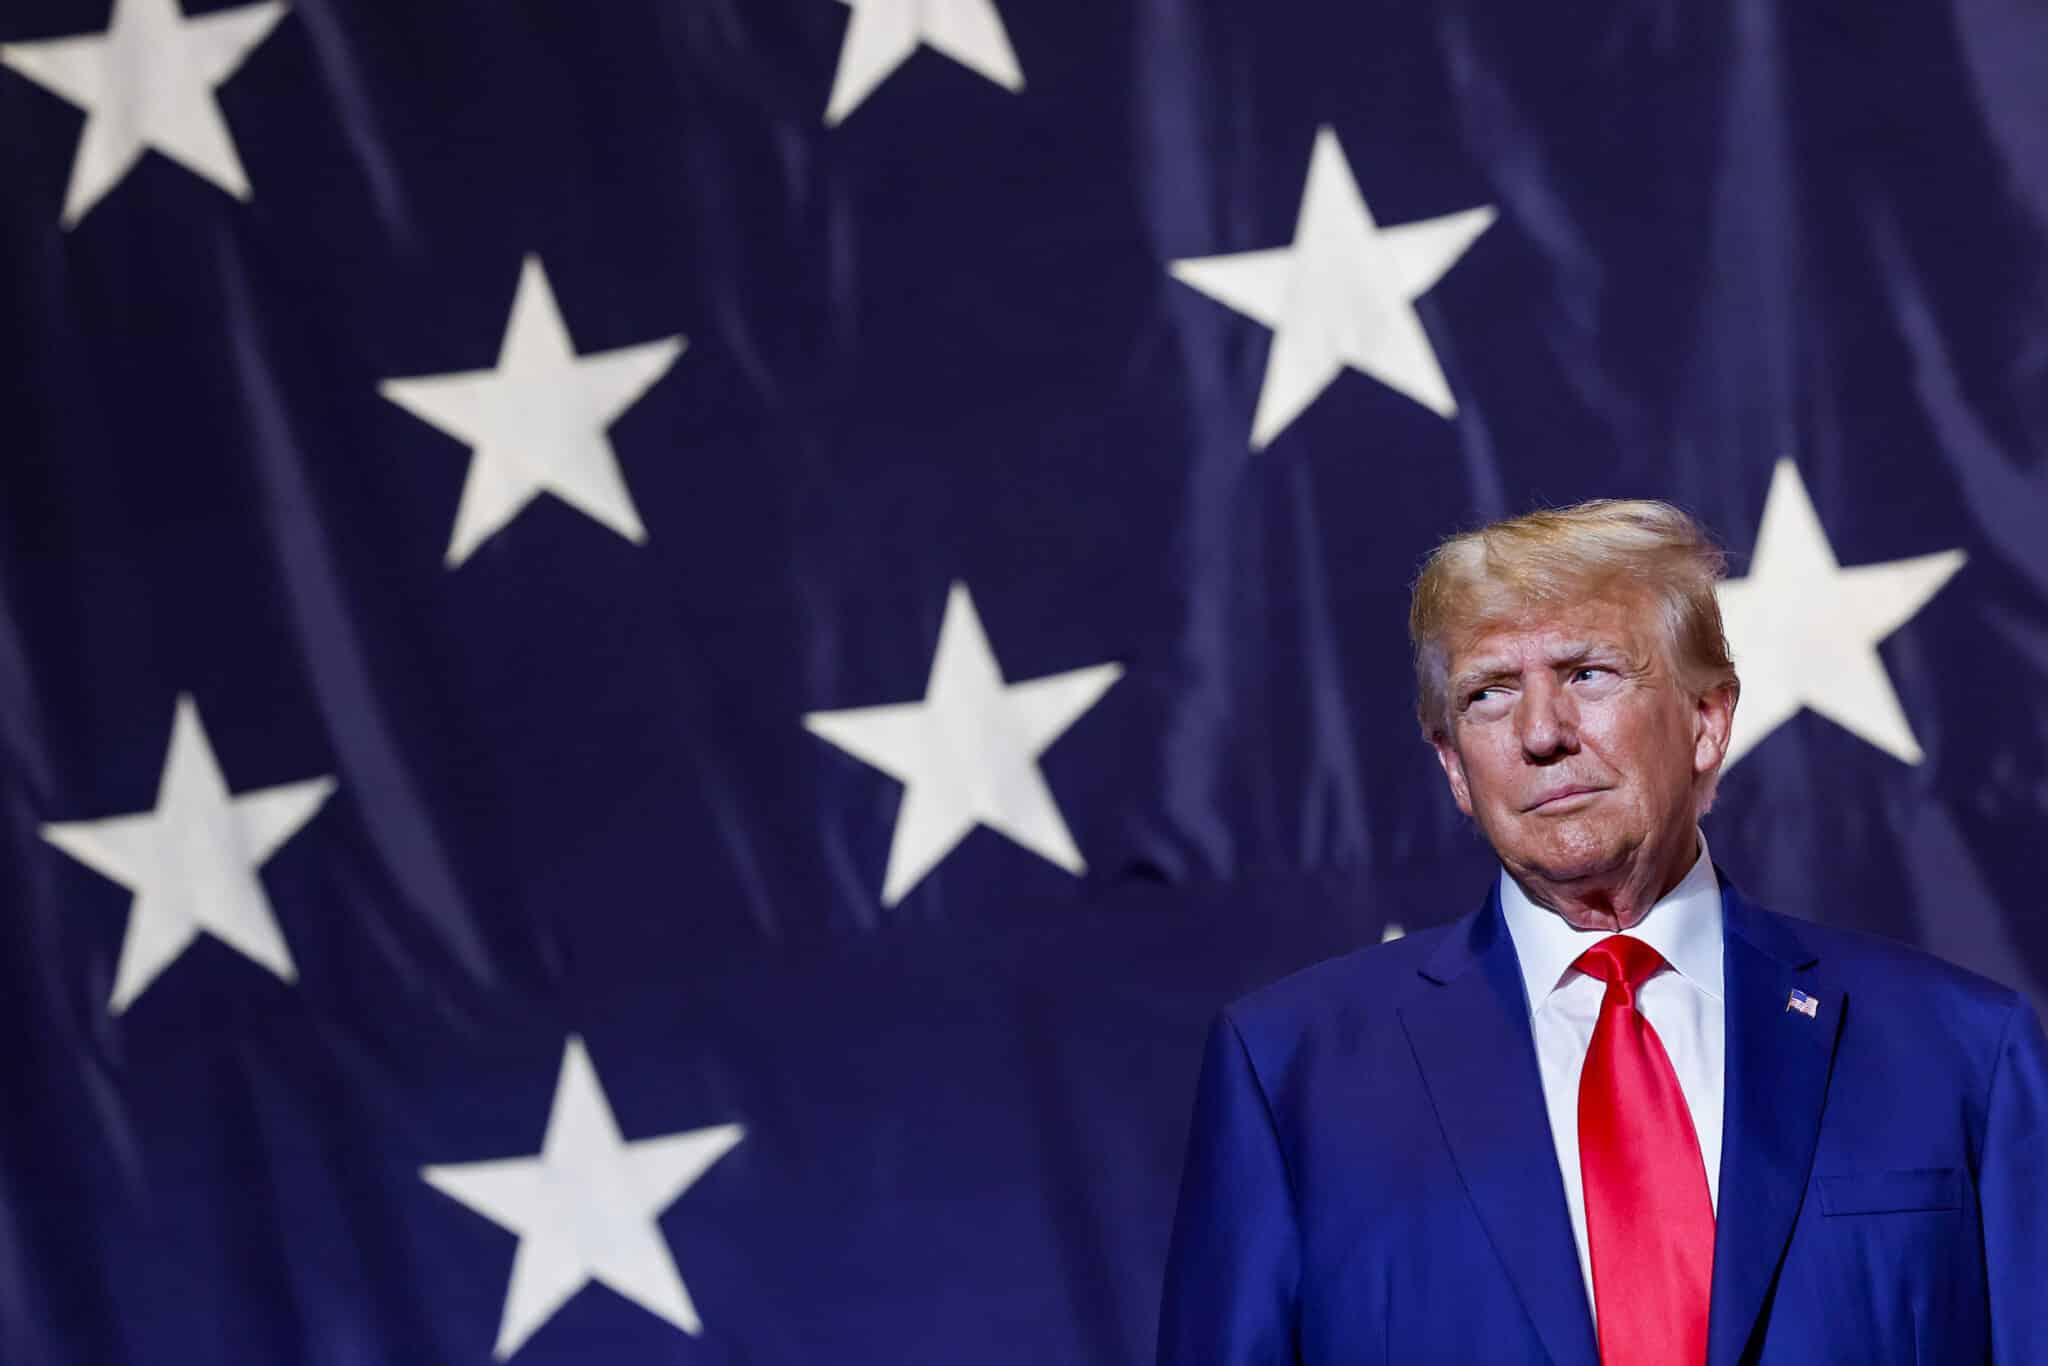 Former President Donald Trump in front of the stars of a US flag during a political rally in Columbus, Georgia, on June 10. Photo: Anna Moneymaker/Getty Images.